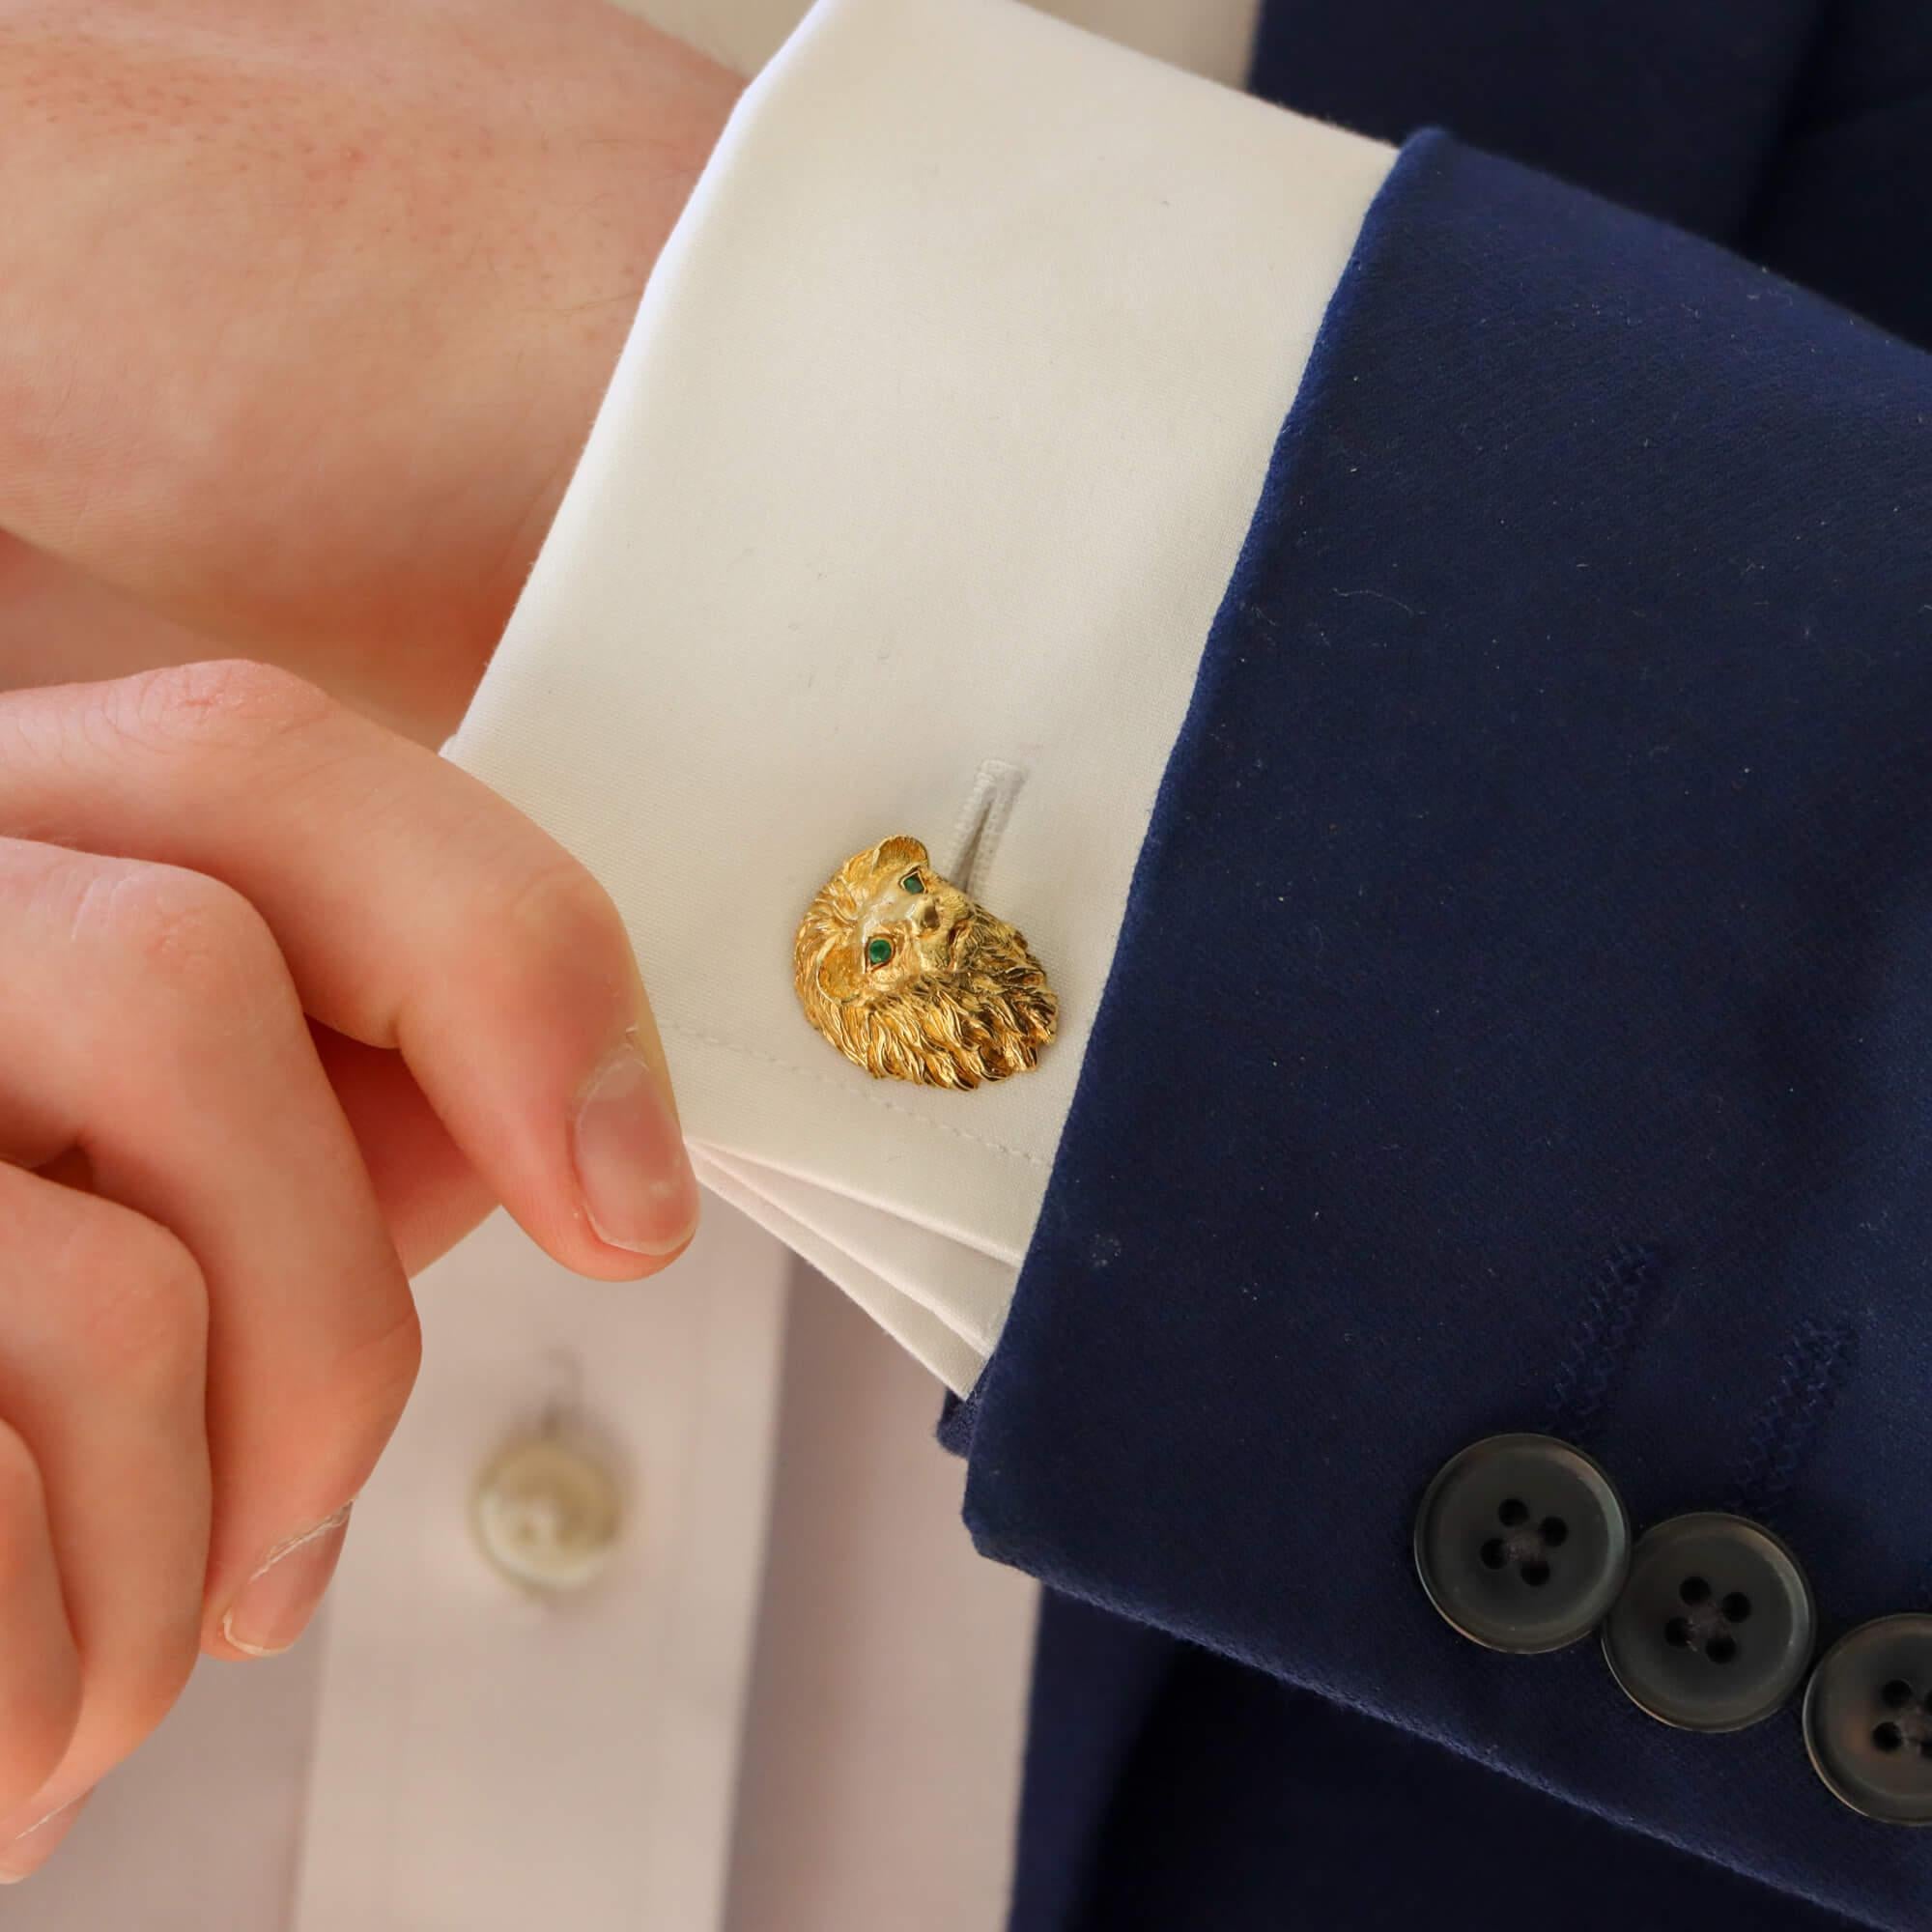 A rather beautiful pair of vintage Tiffany & Co. emerald lion head cufflinks set in 18k yellow gold. 

Each cufflink depicts a male lions head, expertly crafted and detailed in solid yellow gold. The lions mane has been beautifully detailed so that